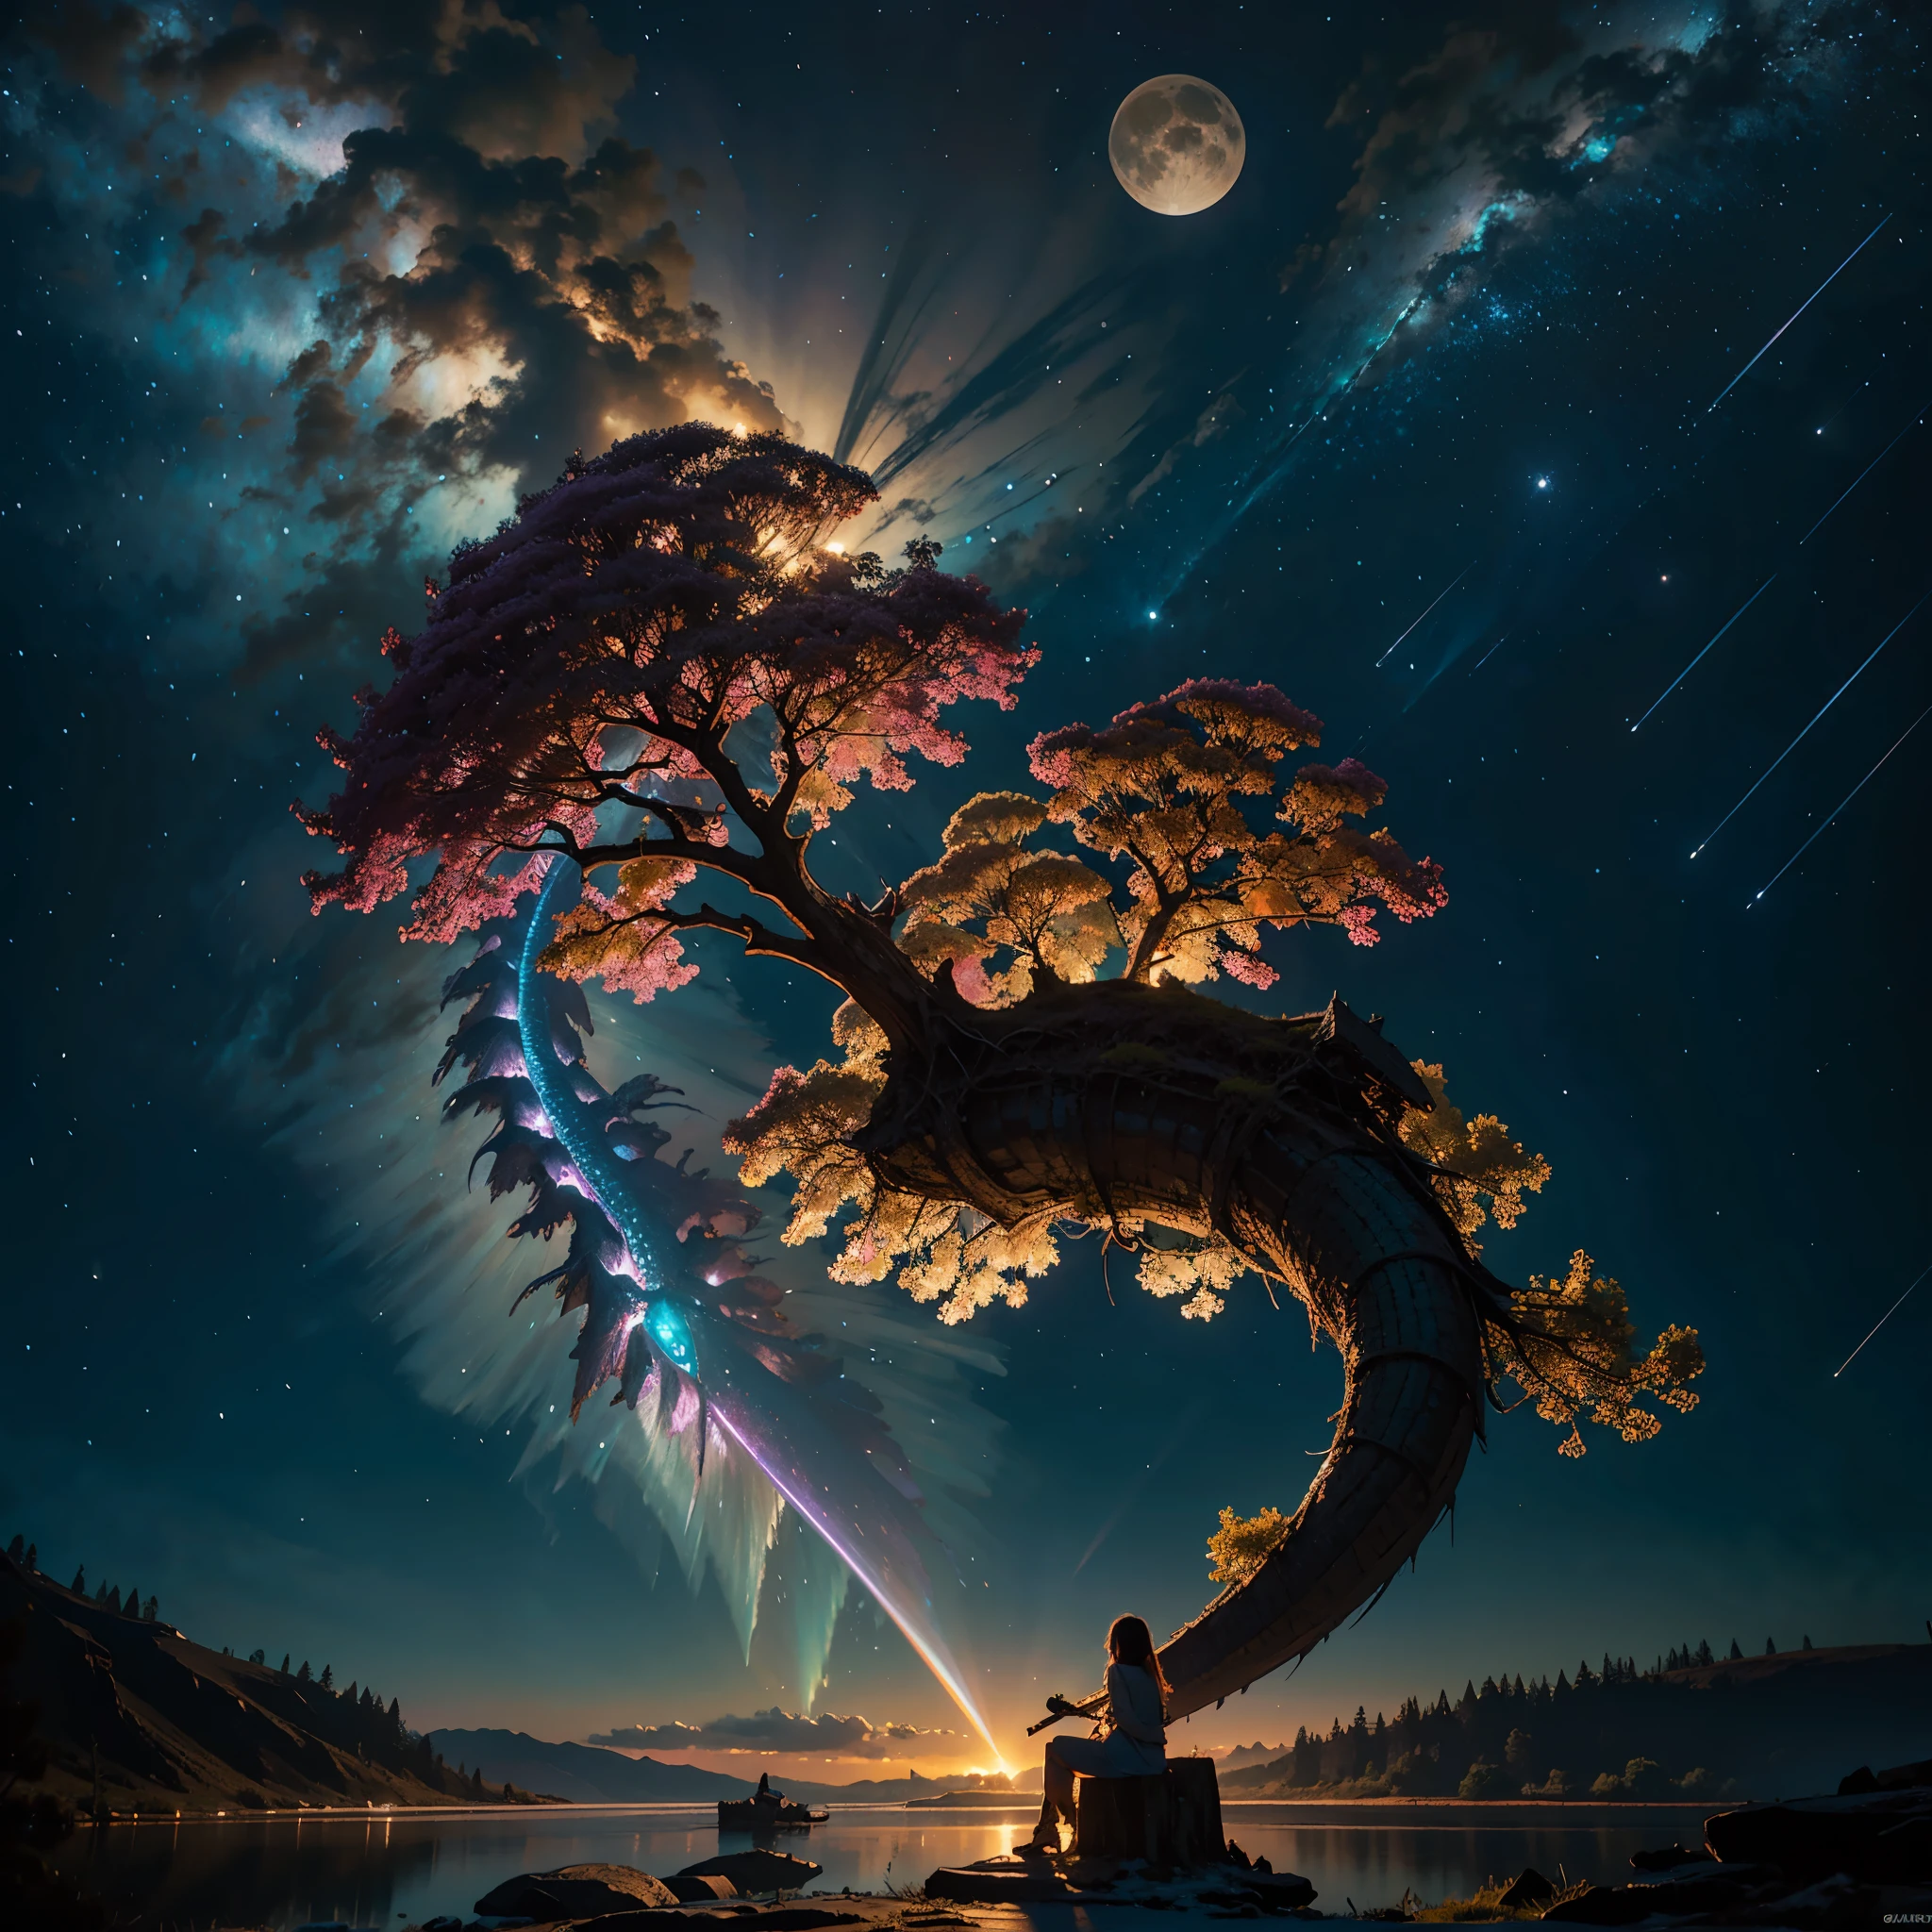 Totem ShootingStar The dragon sleeps in the forest, curled up in a kolachik,lying on its belly, The head lies on the snow nebulae hyper Nebula Moonrise epic moonset panoramic moonshine "Wood Dragon Totem" Unrealengine5 ultra masterpiece meticulously intricate ultra_high-details ultra_high-def ultra_high-res ultra_high-quality optimal ultra_sharpness ultra_photo-realistic ethereal_beauty fantasy_illustration:1.3 enchanting_gaze otherworldly_charm mystical_sky deep path equirectangular moonlit_night detailed_cloudscape:1.3 batlying_in_the_sky_background bat thong beholder legs_dangling_above_lava glowing_torches long_leges cgi vfx sfx reflex Octane_rendered extreme improved UHD focus XT3 accurate DSLR HDR romm rgb pbr 3dcg fxaa blay vivid colors-coded anti-aliasing fkaa txaa rtx ssao opengl-shaders glsl-shaders post-processing post-production cell-shading tone-mapping perfection volumetric Lightning contrast Cinematic moonlight backlight global illumination sunflower luminescence Crystalline invoke magic monarch monstrous viceroy creature sundrop onyx summon transparent ruby Tourmaline crystal pearls paddling opal fleuraison monster butterfly "WoodDragon" reflection strange glow lazuli hole flash Earth saturate hearth blooms floraison varies multi etc. --s 1000 --c 20 --q 20 --chaos 100